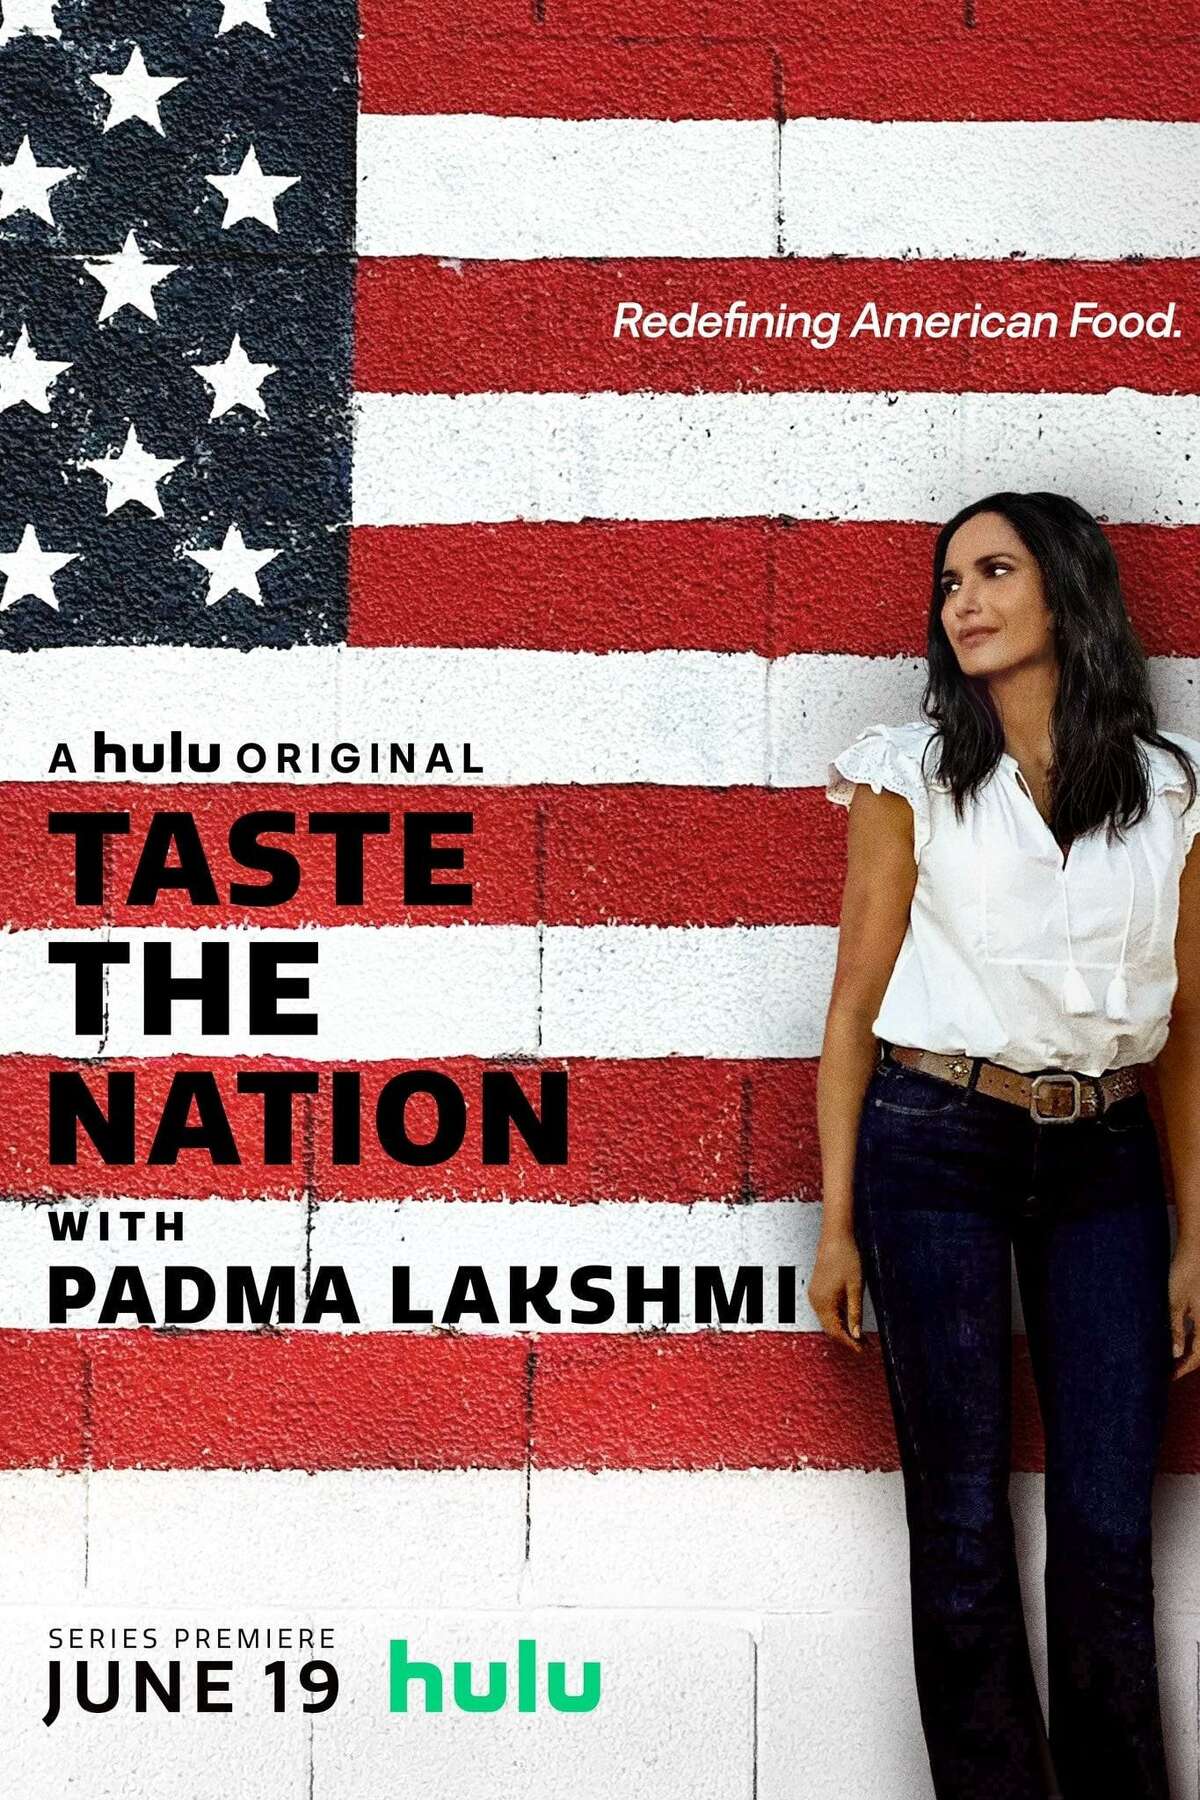 Hulu’s new series “Taste the Nation with Padma Lakshmi” looks at the cultures behind American food.